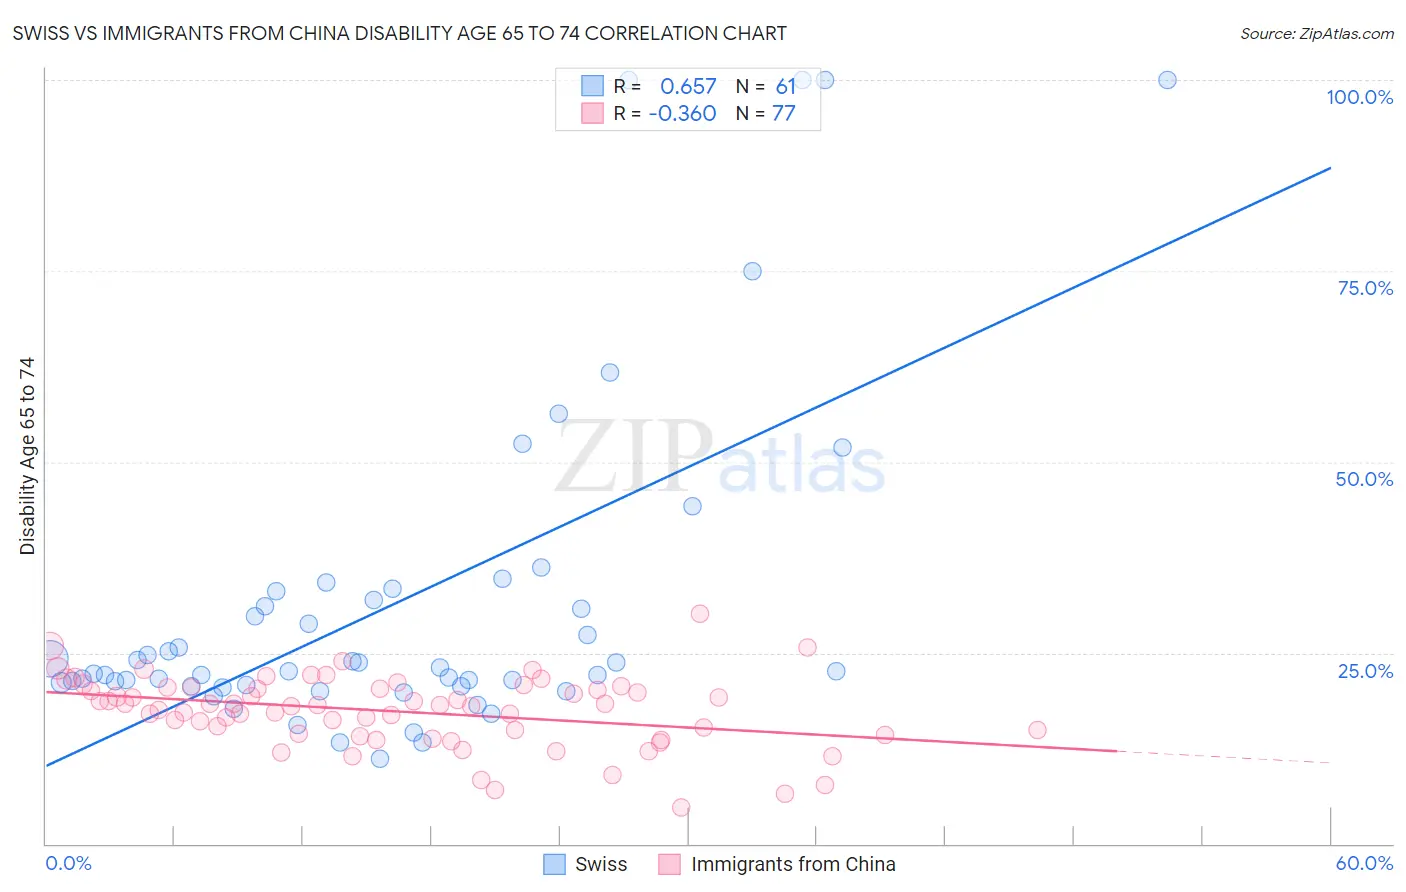 Swiss vs Immigrants from China Disability Age 65 to 74